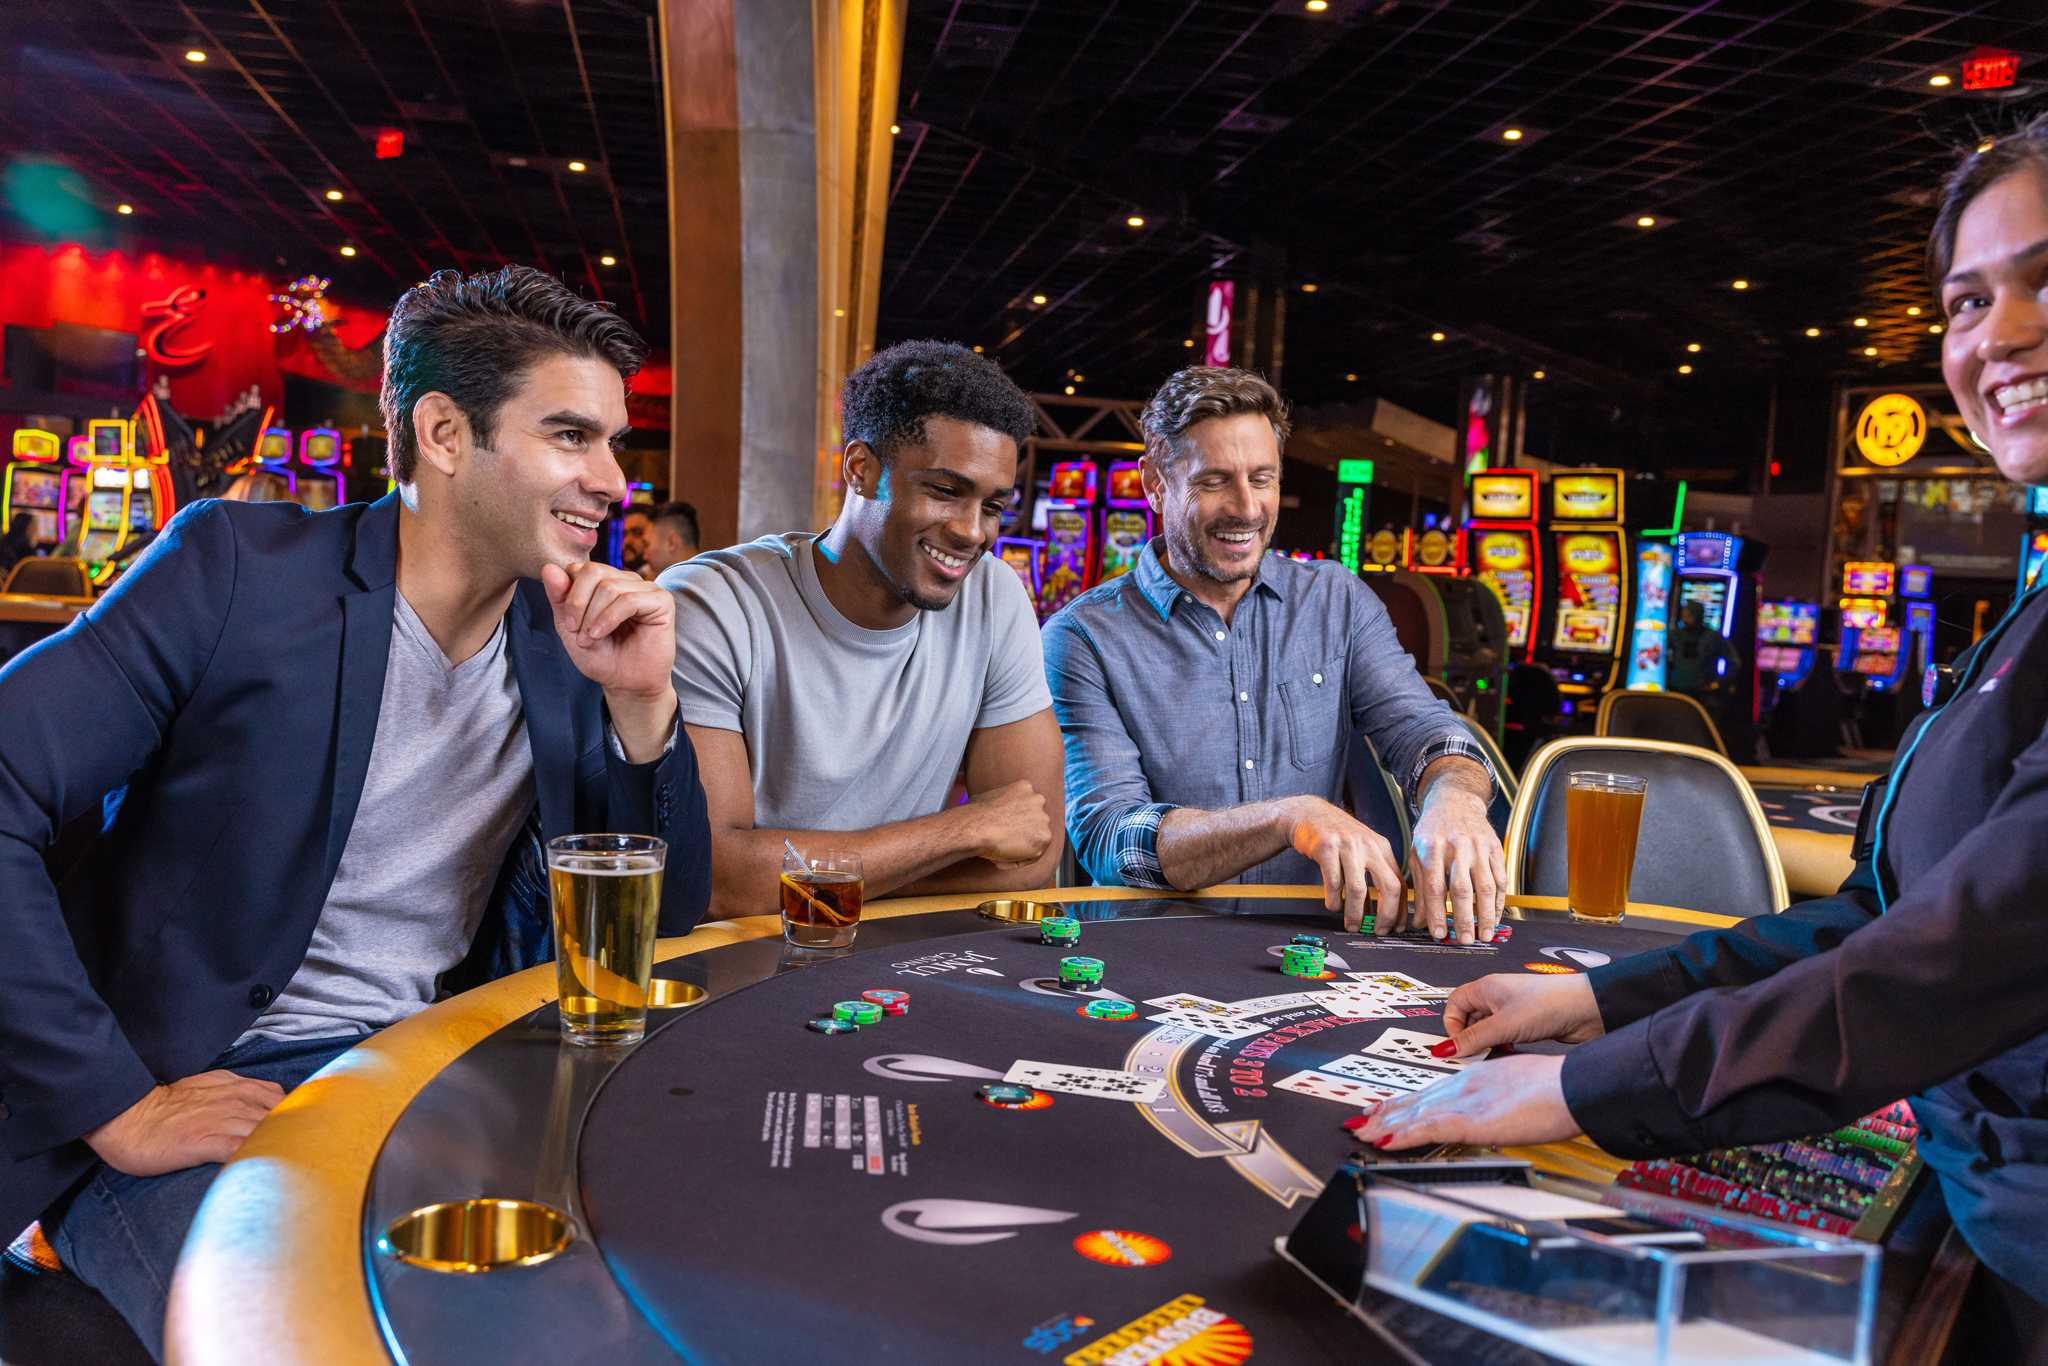 How to start With casinos in 2021